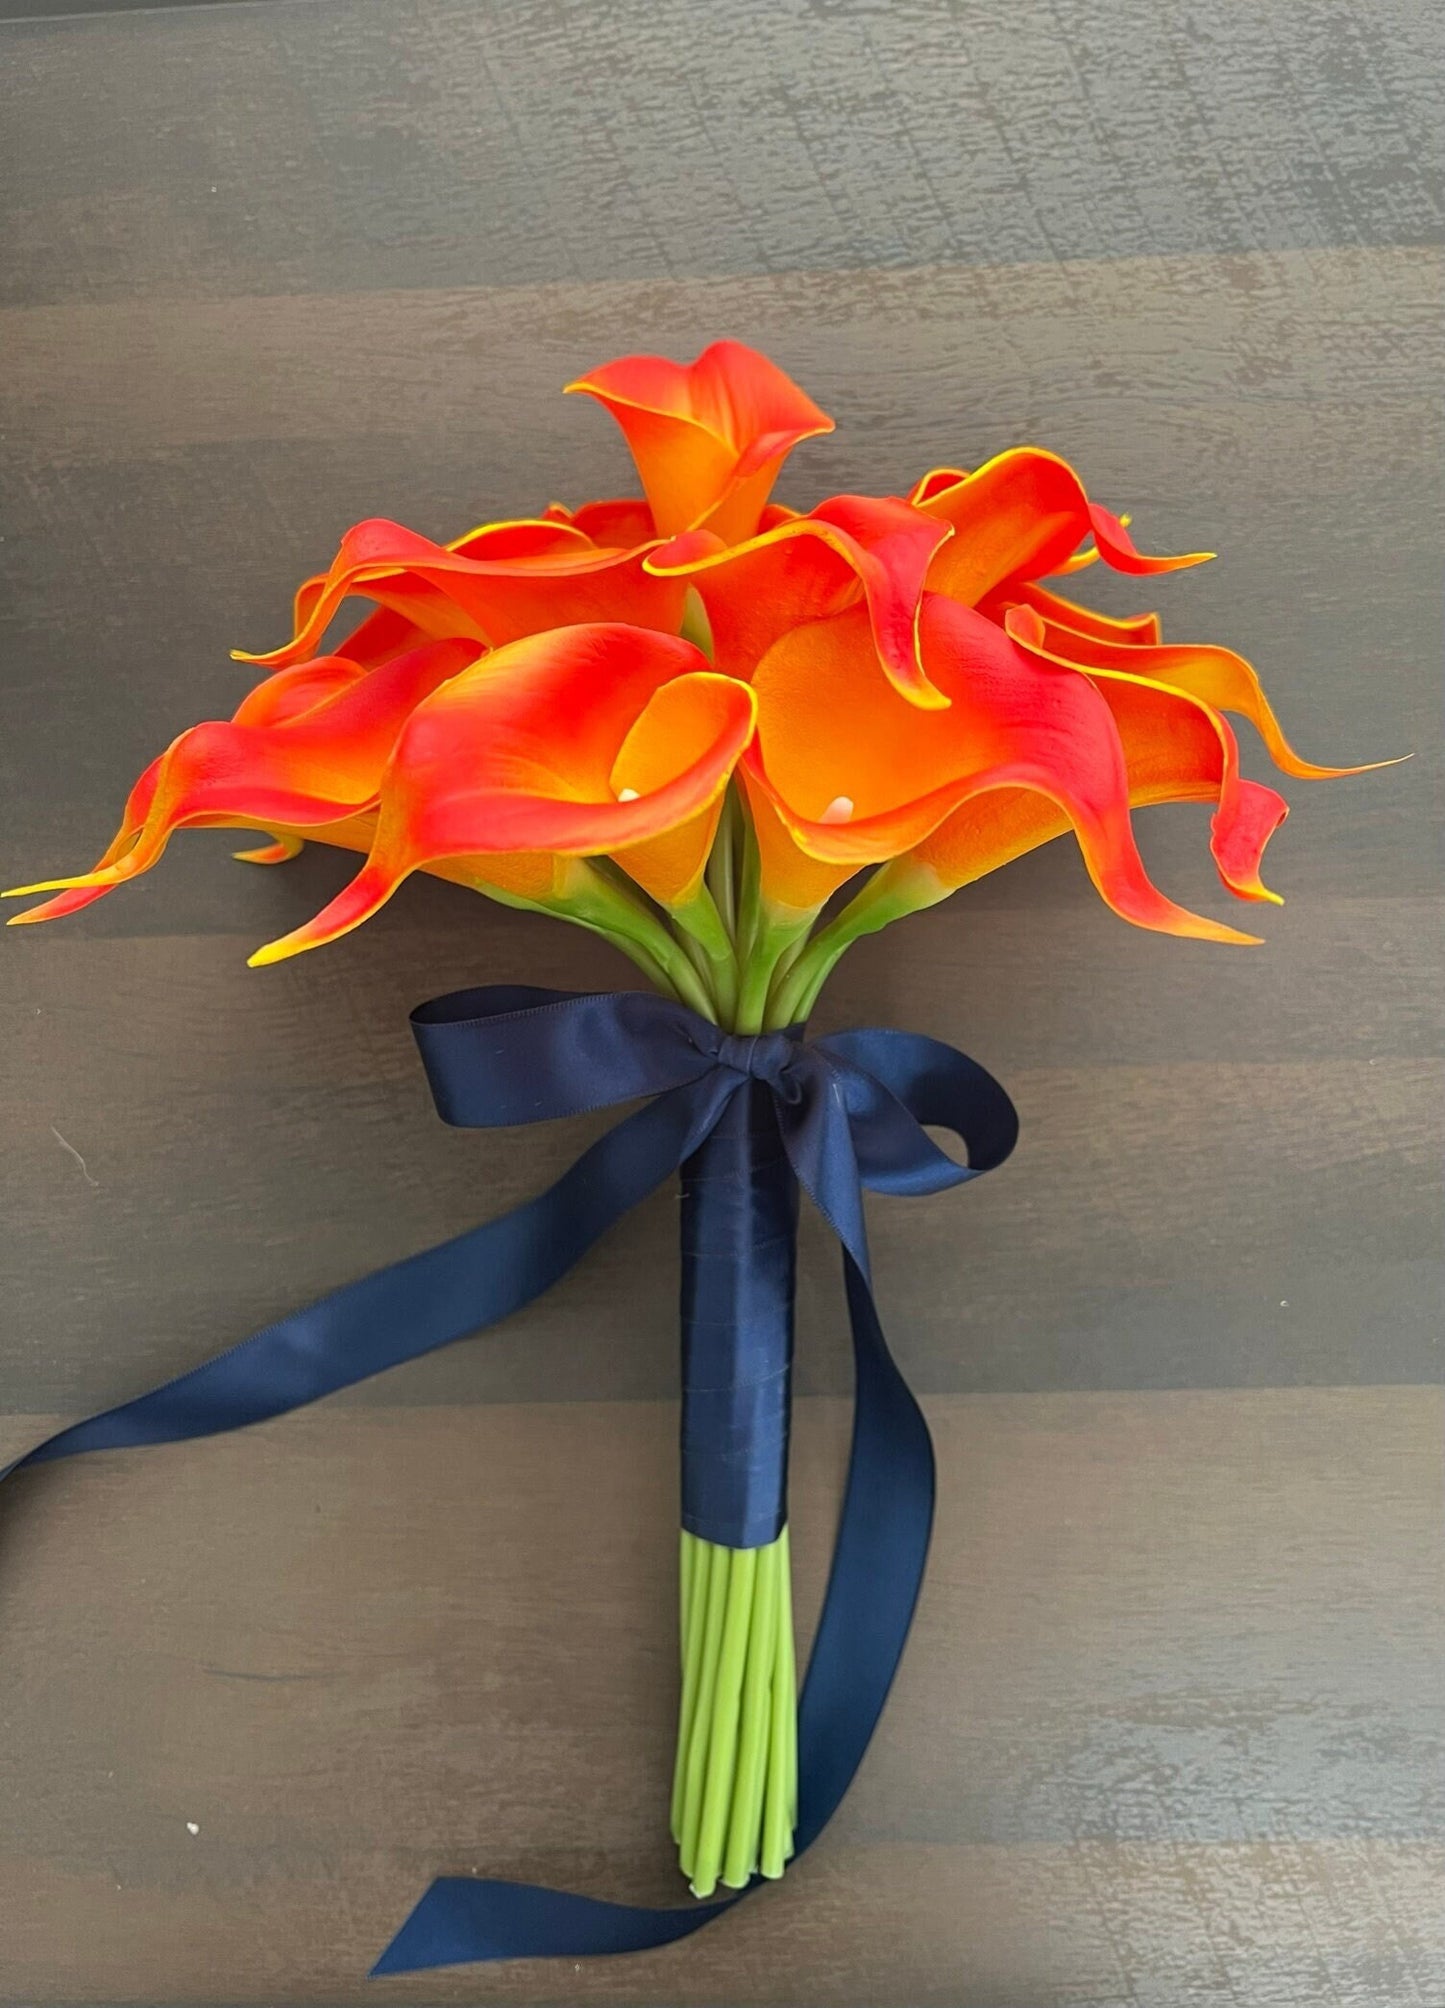 Luxurious Persimmon Tangerine Calla Lily Wedding Ensemble - Handcrafted Bridal Bouquet & Boutonniere Set